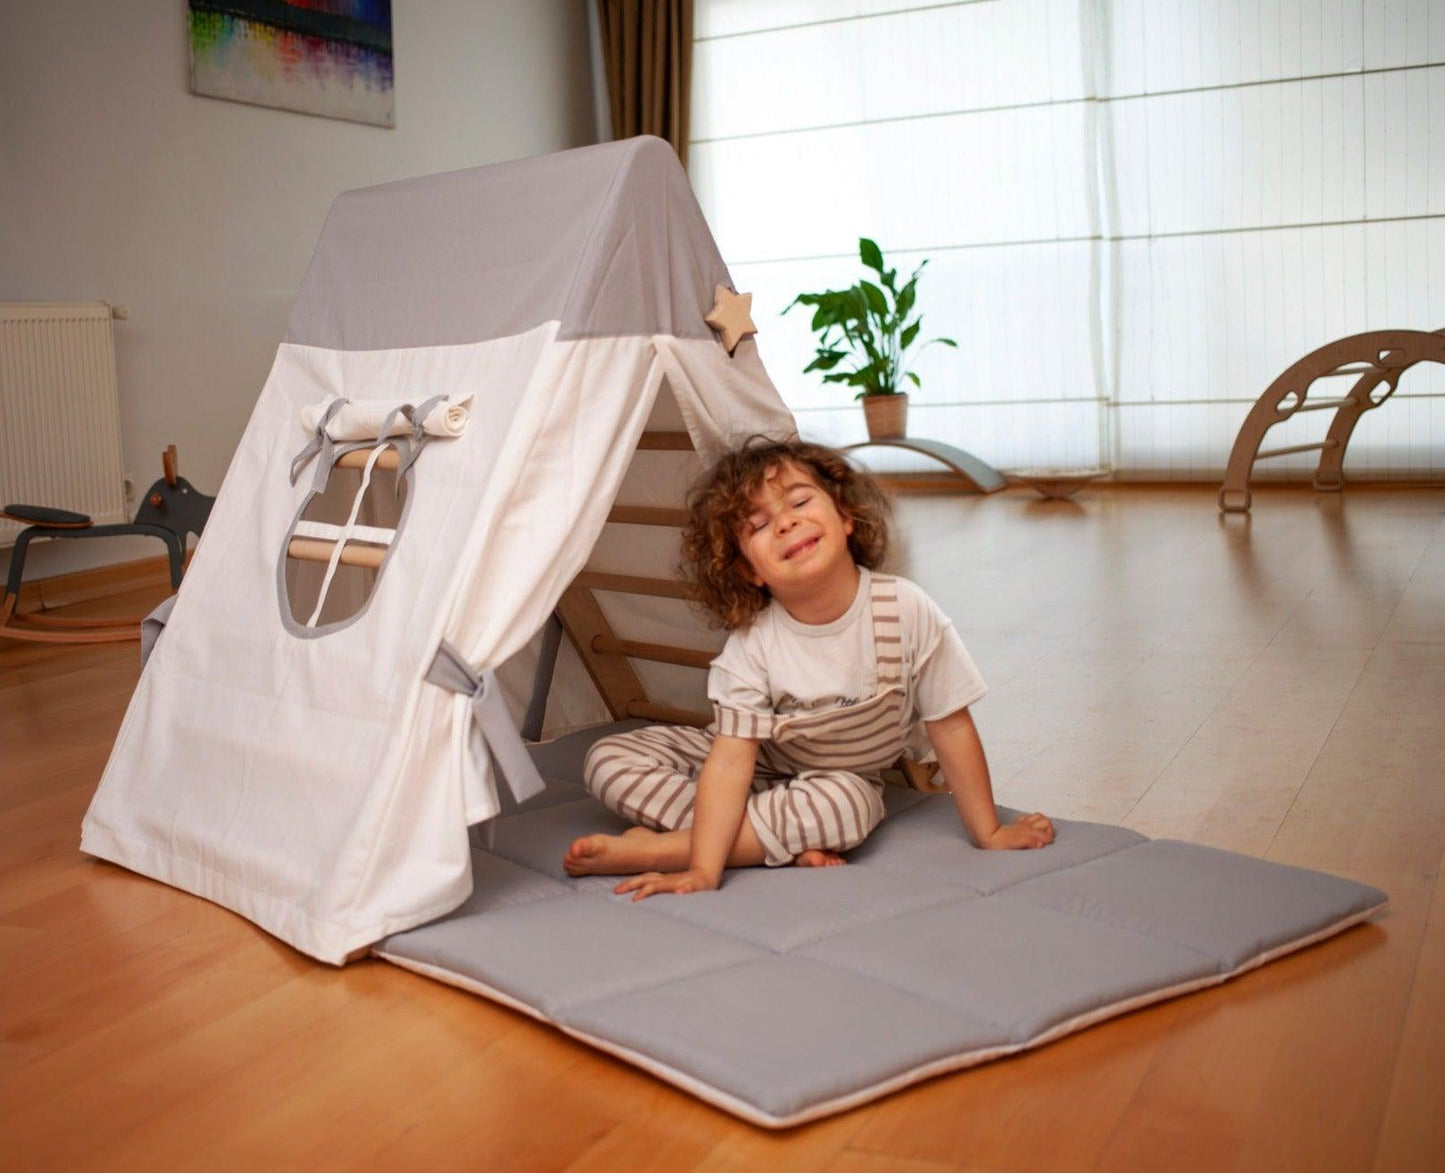 Tent Cover and Play Mat Set for Climbing Triangle - Montessori Toy for Developing Motor Skills and Coordination